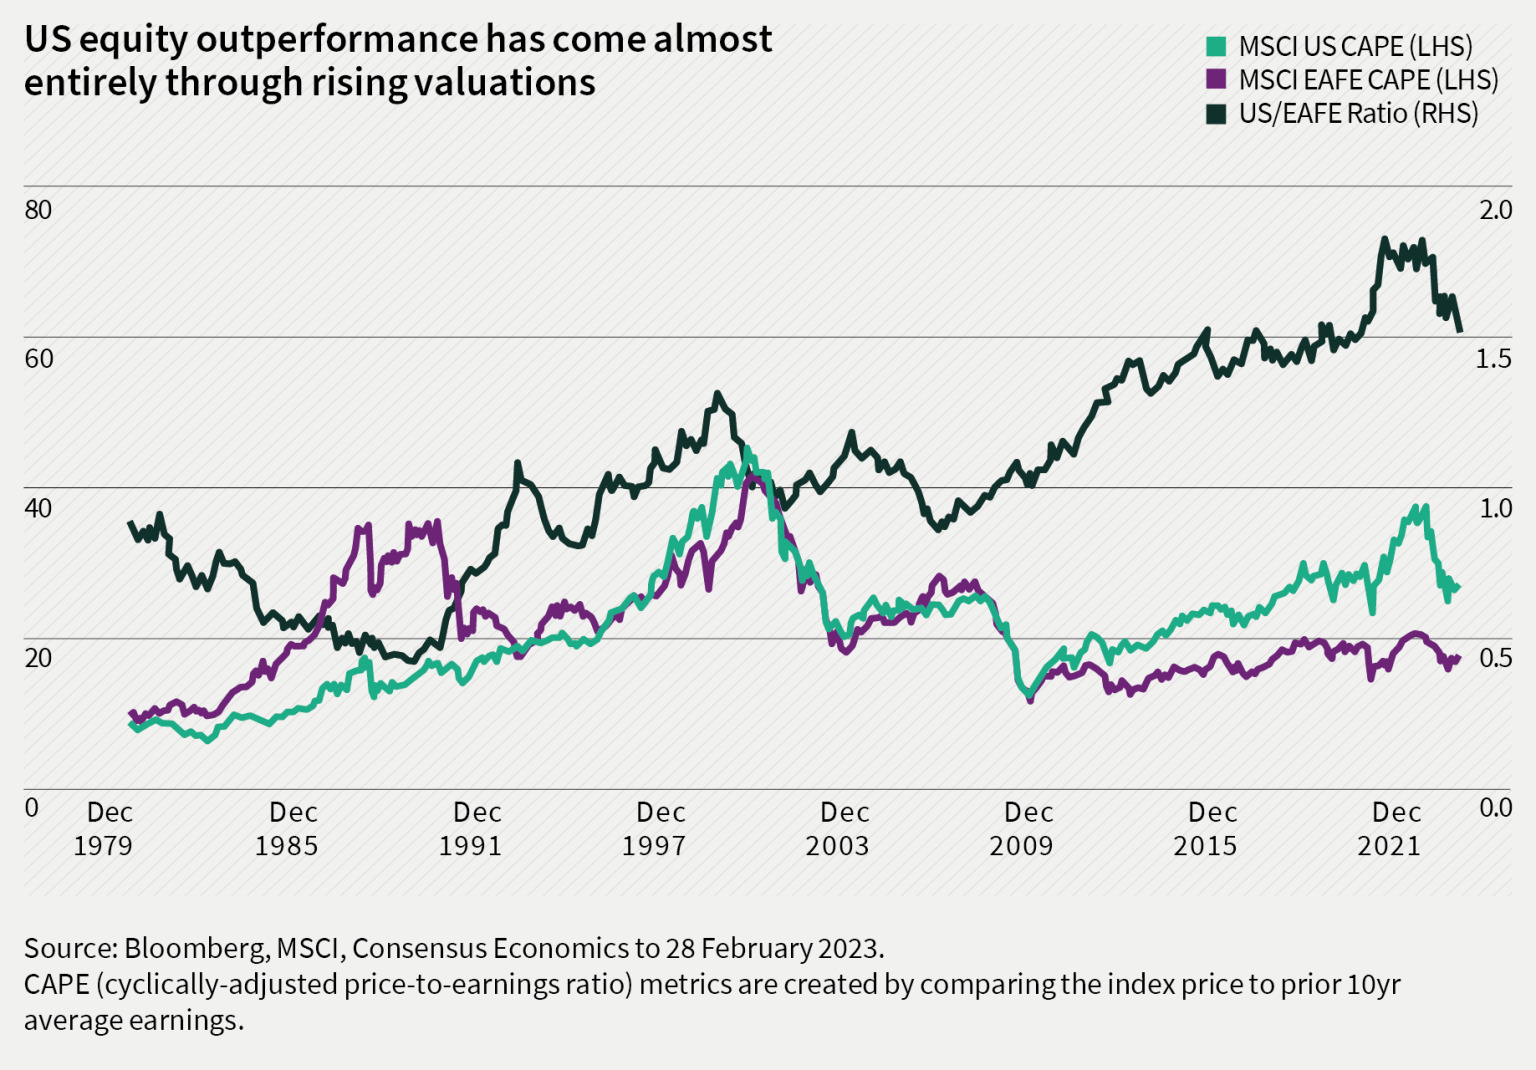 US equity outperformance has come almost entirely through rising valuations